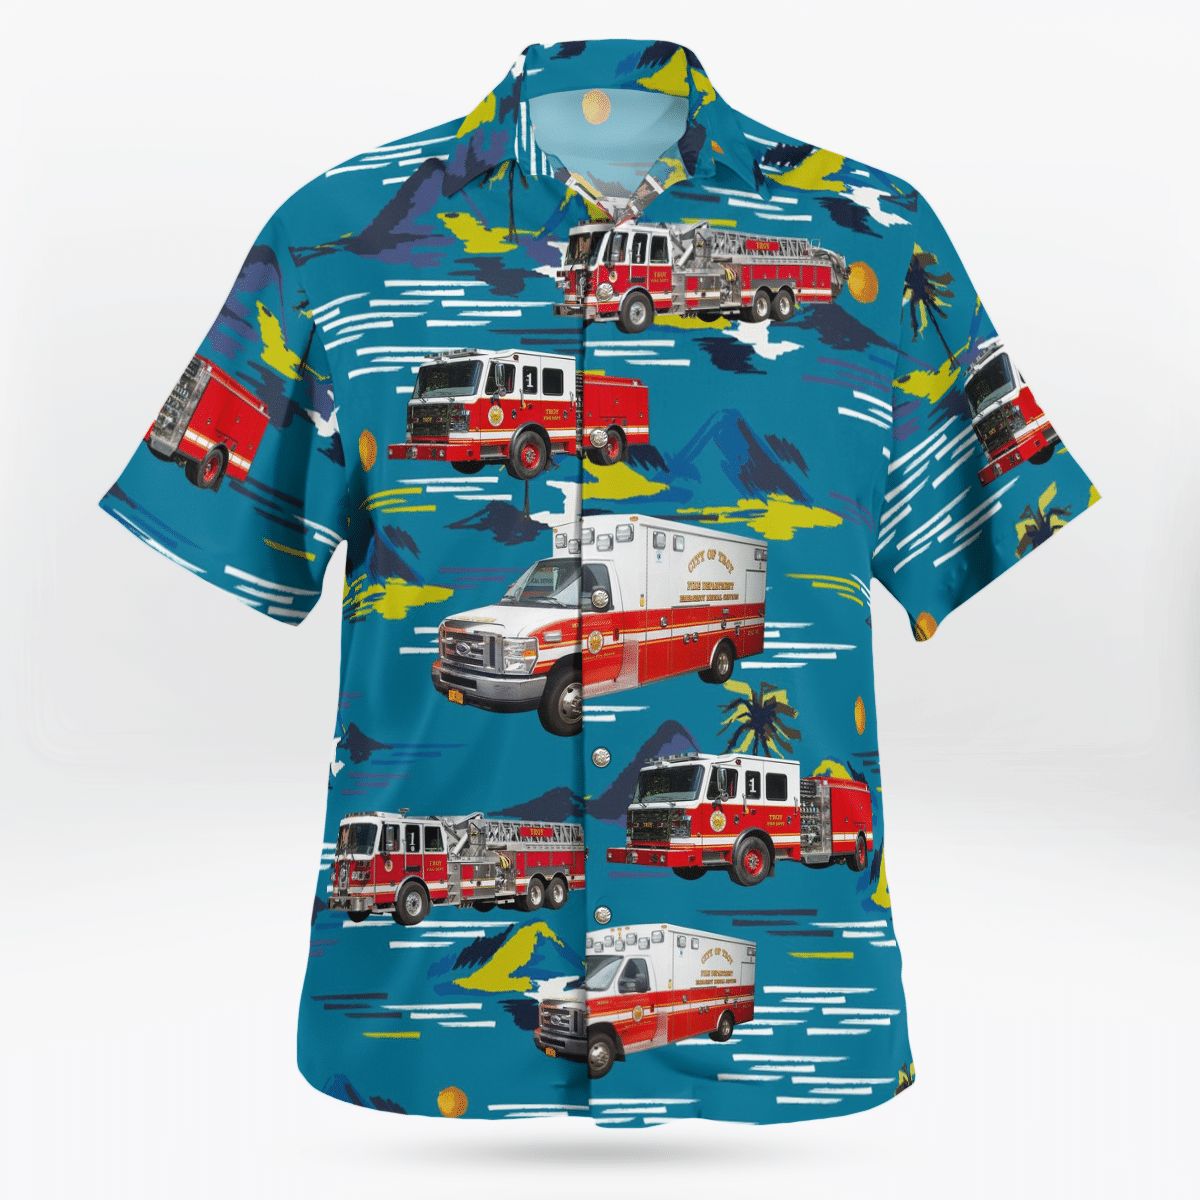 Hawaiian shirts never go out of style 43